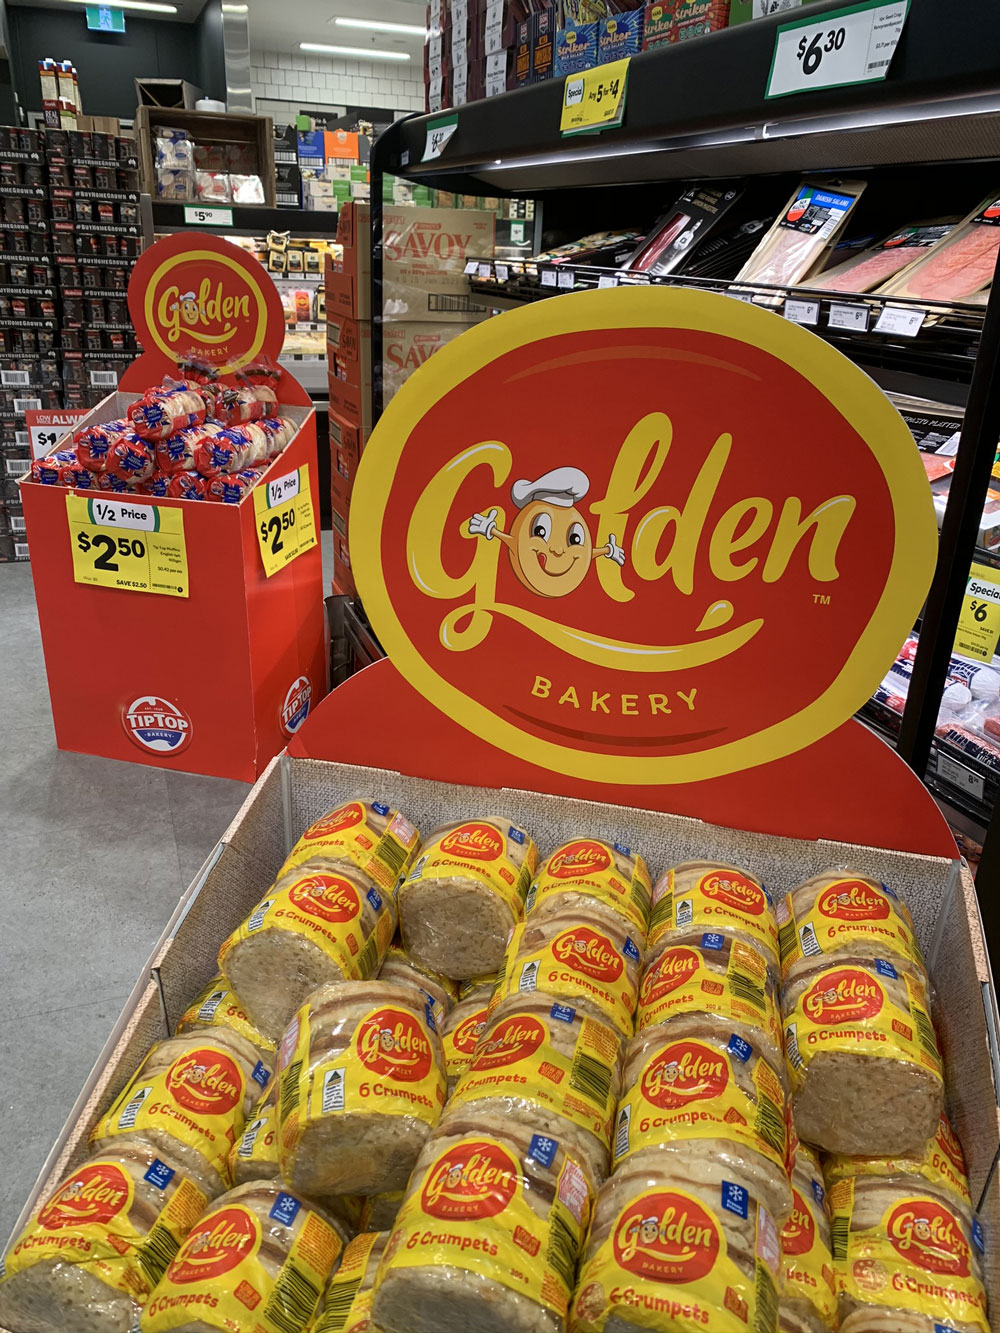 Golden Bakery 'Crumpets' retail display stand